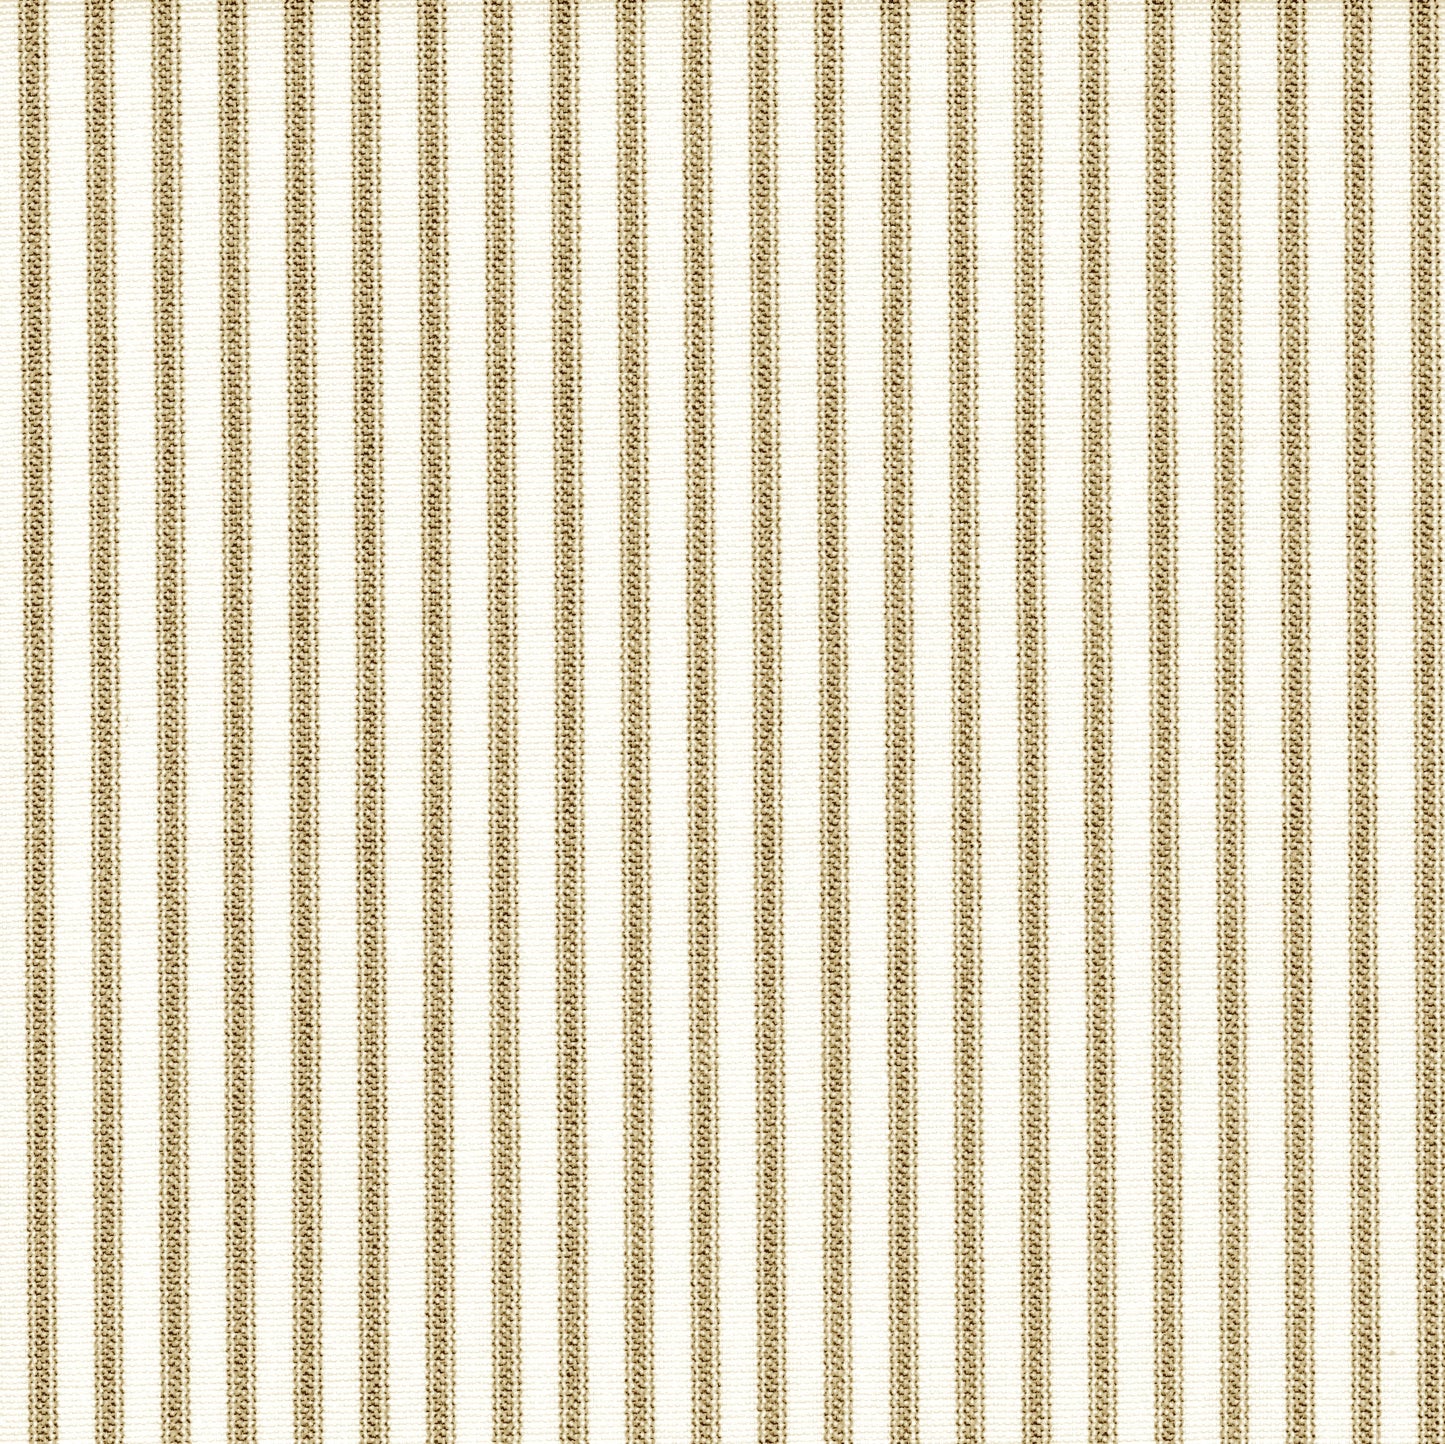 empress swag valance in farmhouse rustic brown ticking stripe